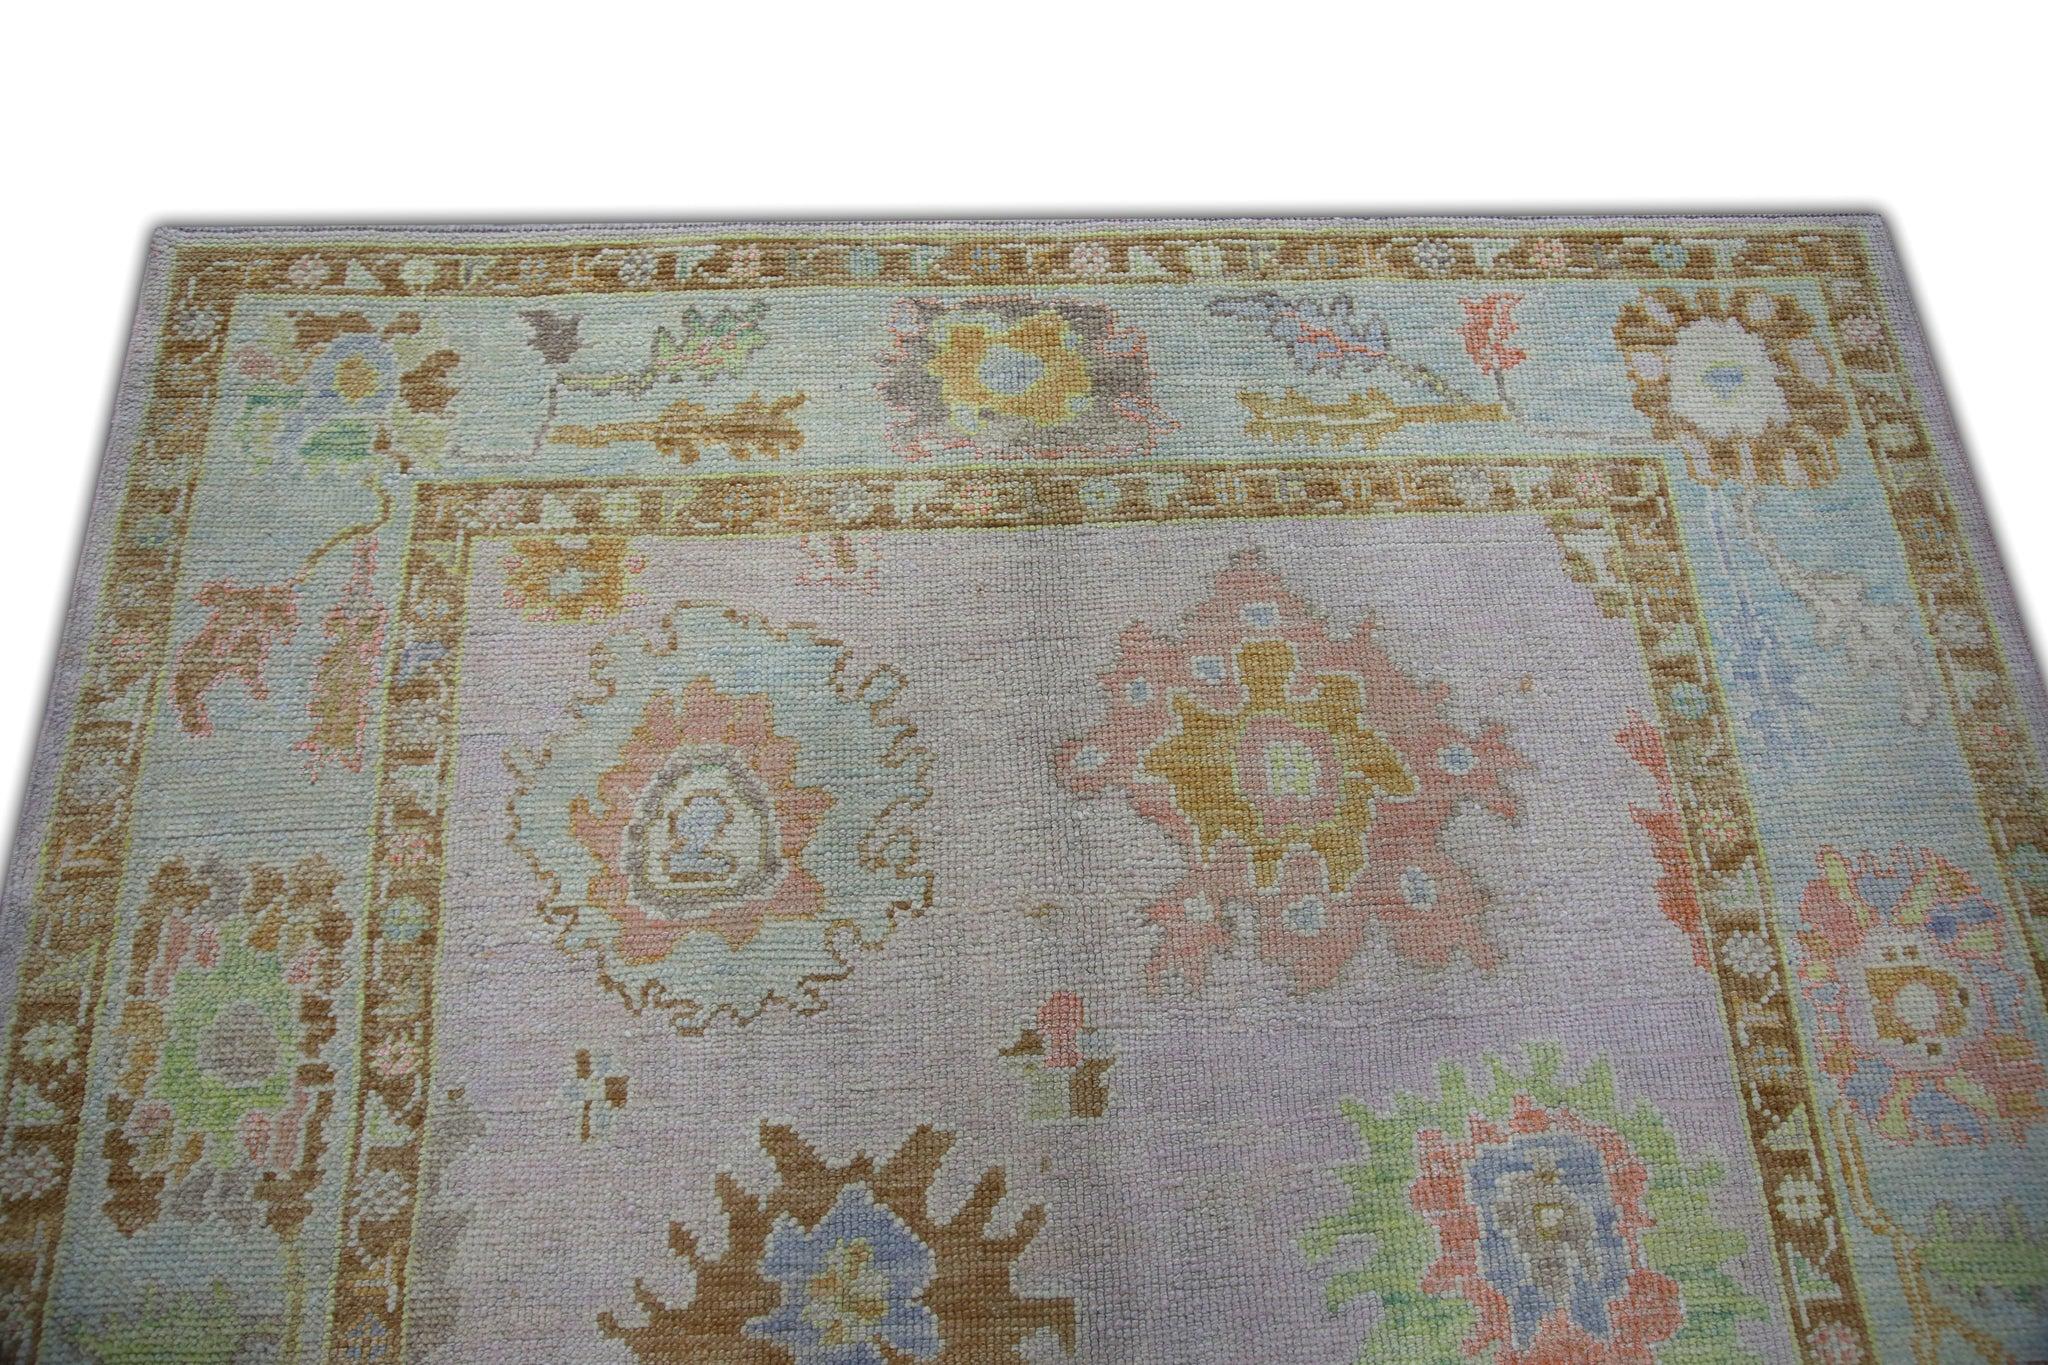 Multicolor Floral Handwoven Wool Turkish Oushak Rug 5' x 6'8